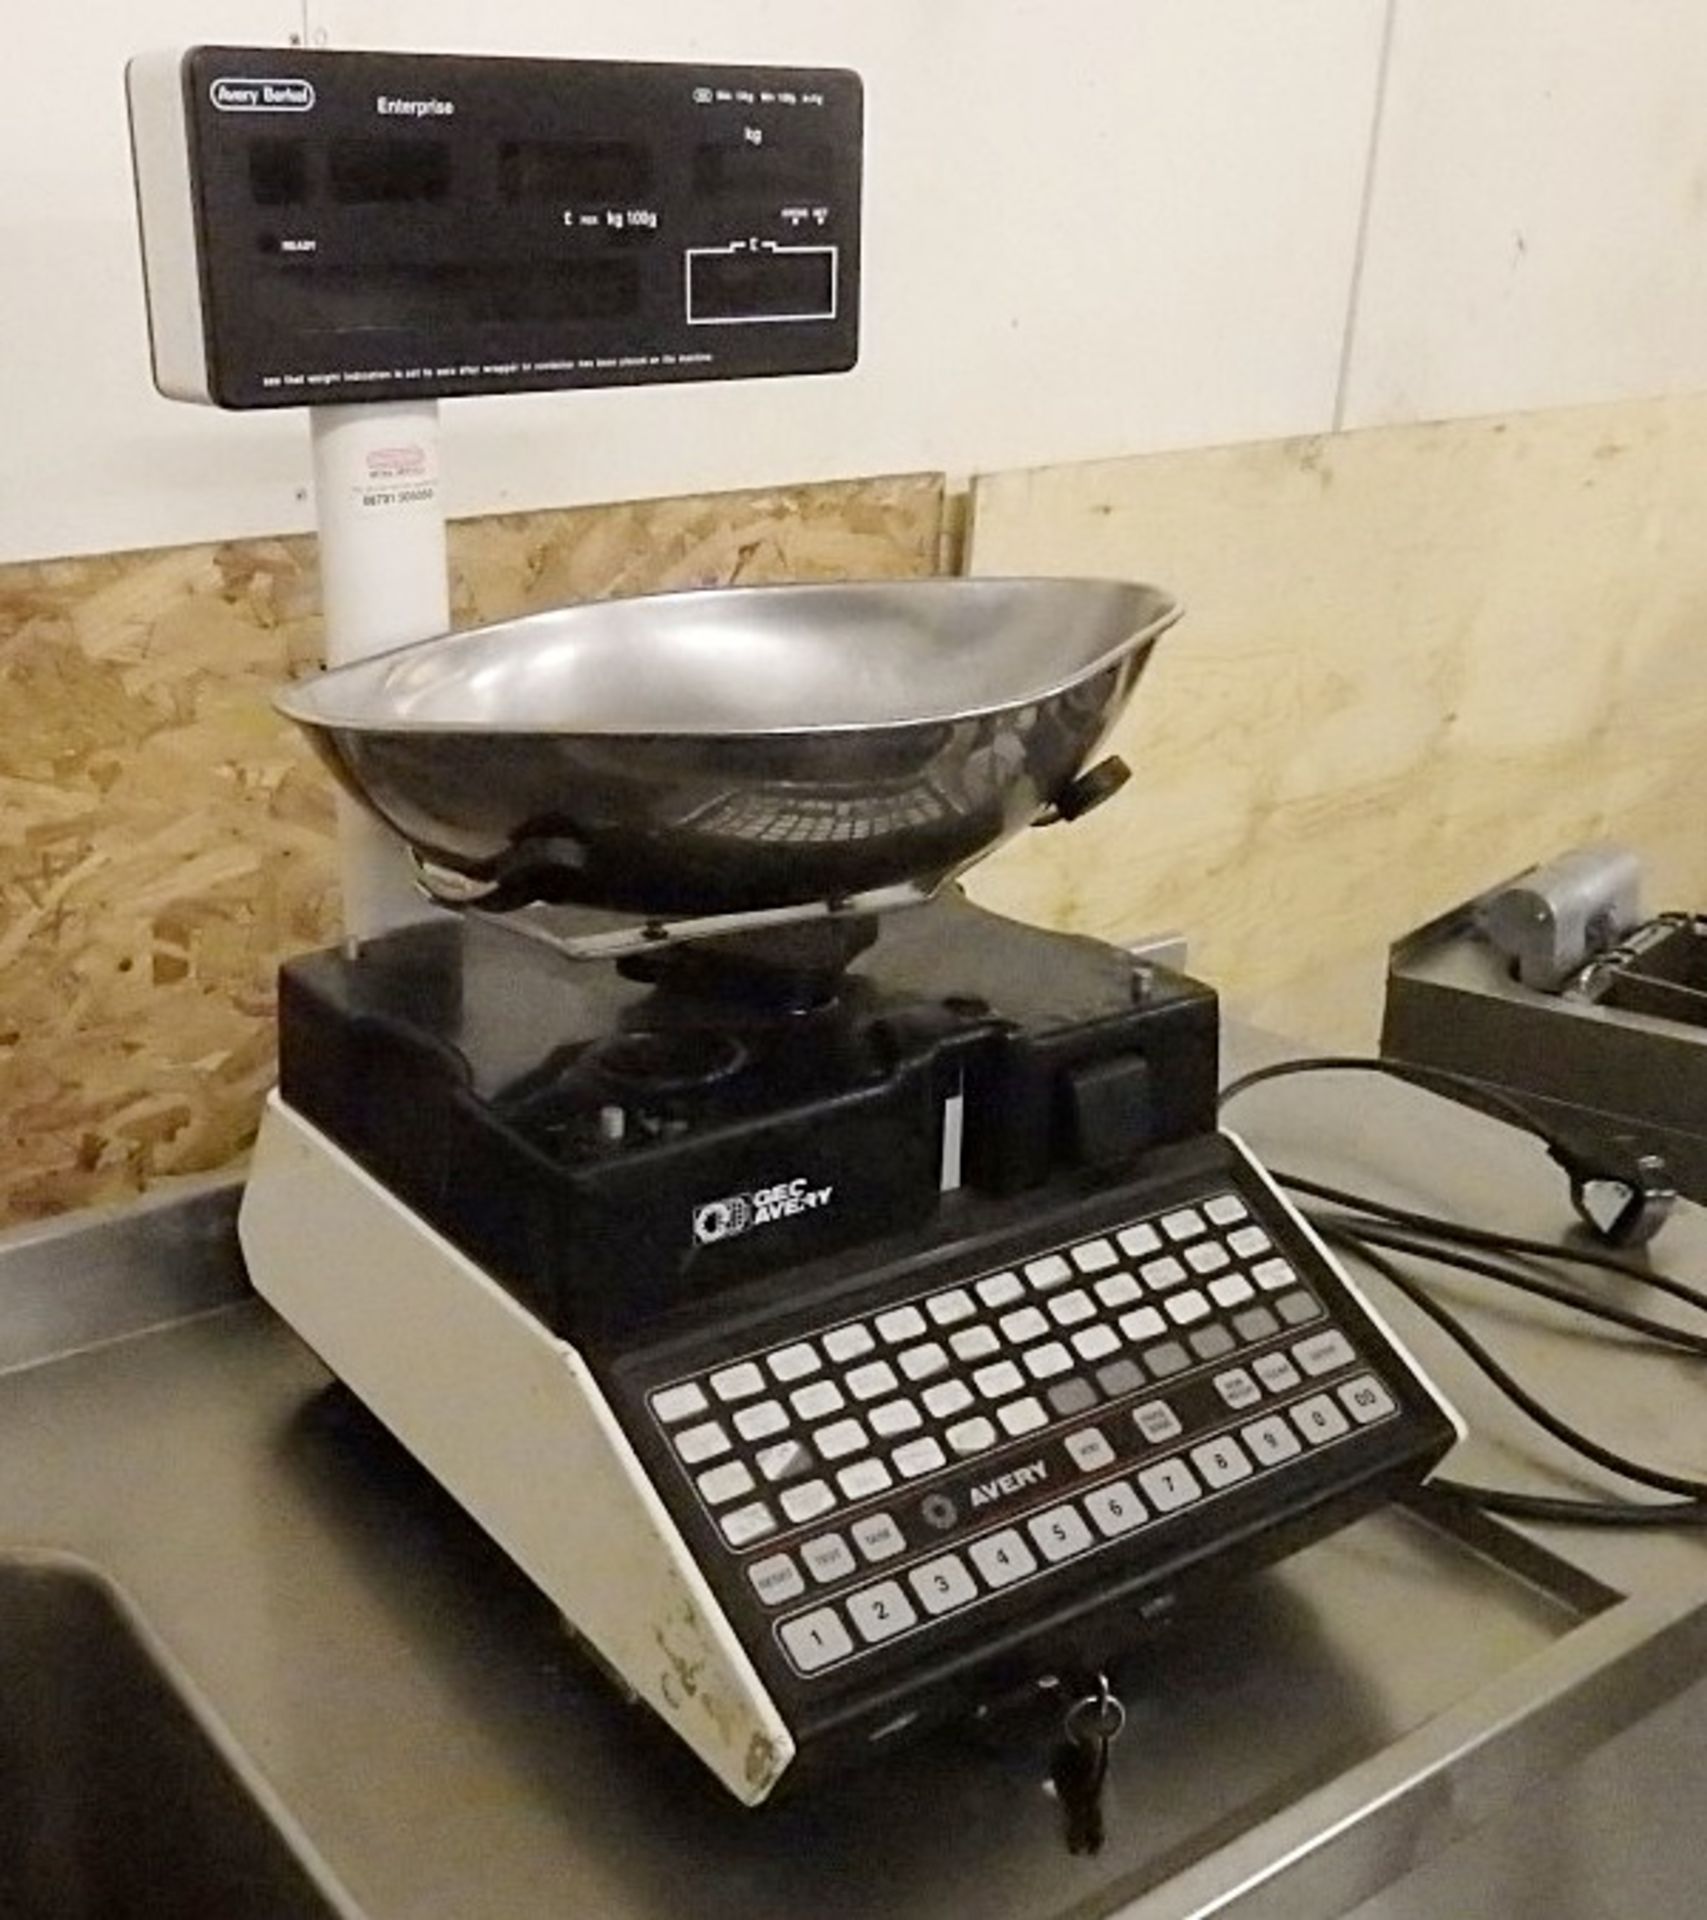 1 x Avery Veg Scales - Presented In Good Condition - Dimensions: H60 x D46 x W34cm - Ref: M071 - - Image 3 of 8